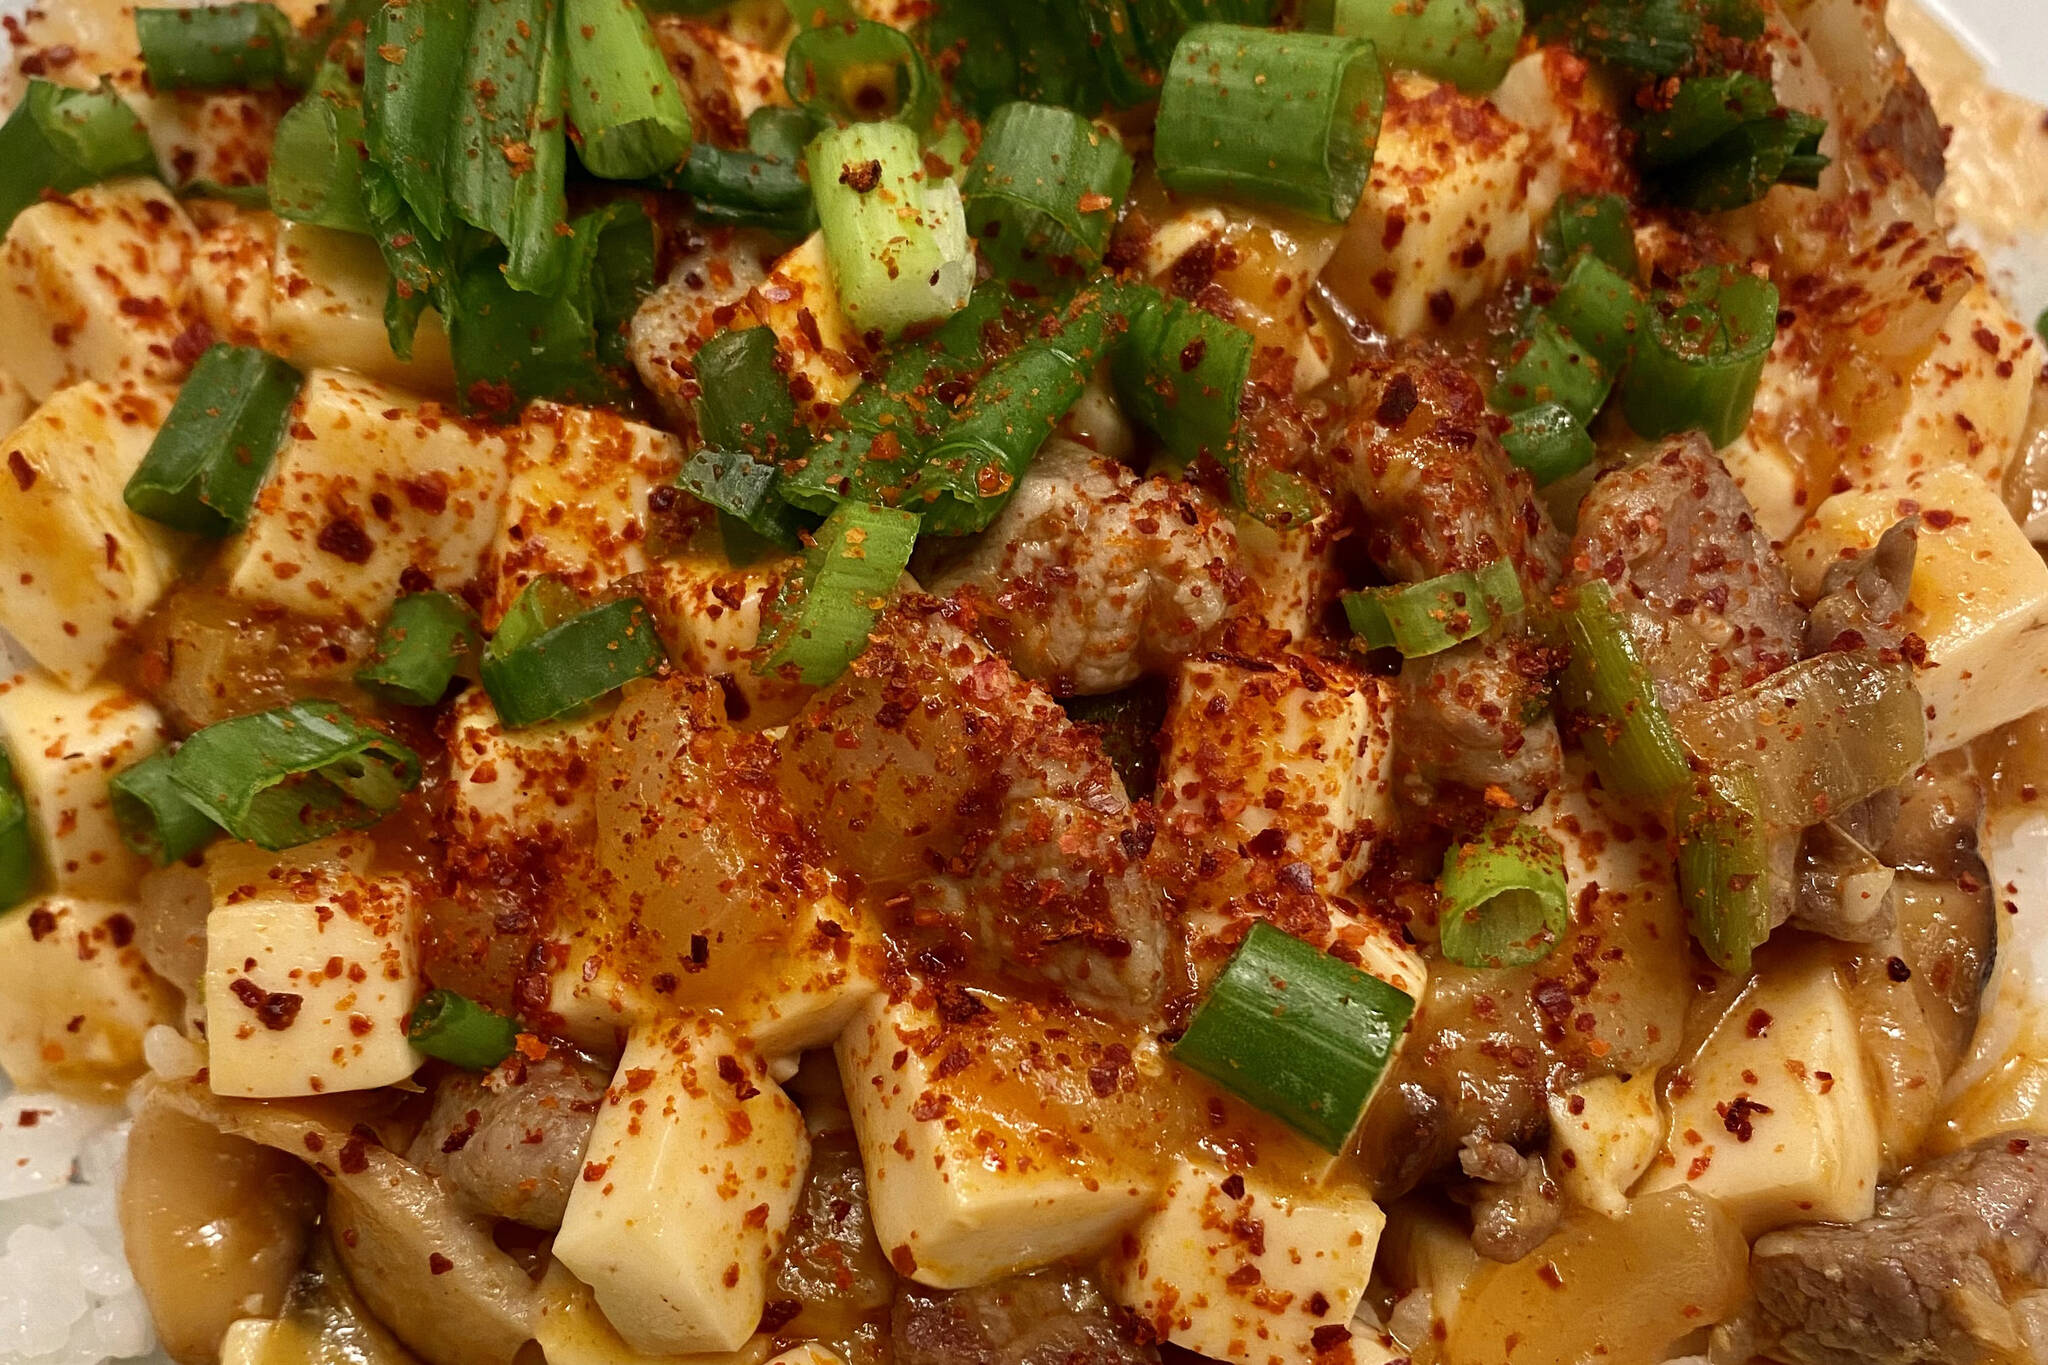 Korean red pepper paste adds heat to this Mapo tofu recipe. (Photo by Tressa Dale/Peninsula Clarion)